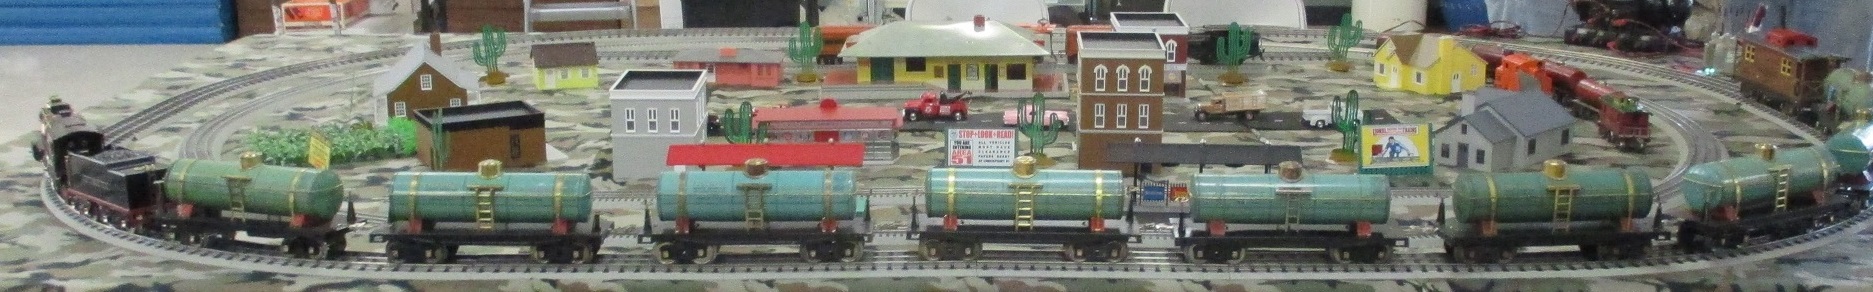 A wide assortment of toy trains awaits you at TCA meets